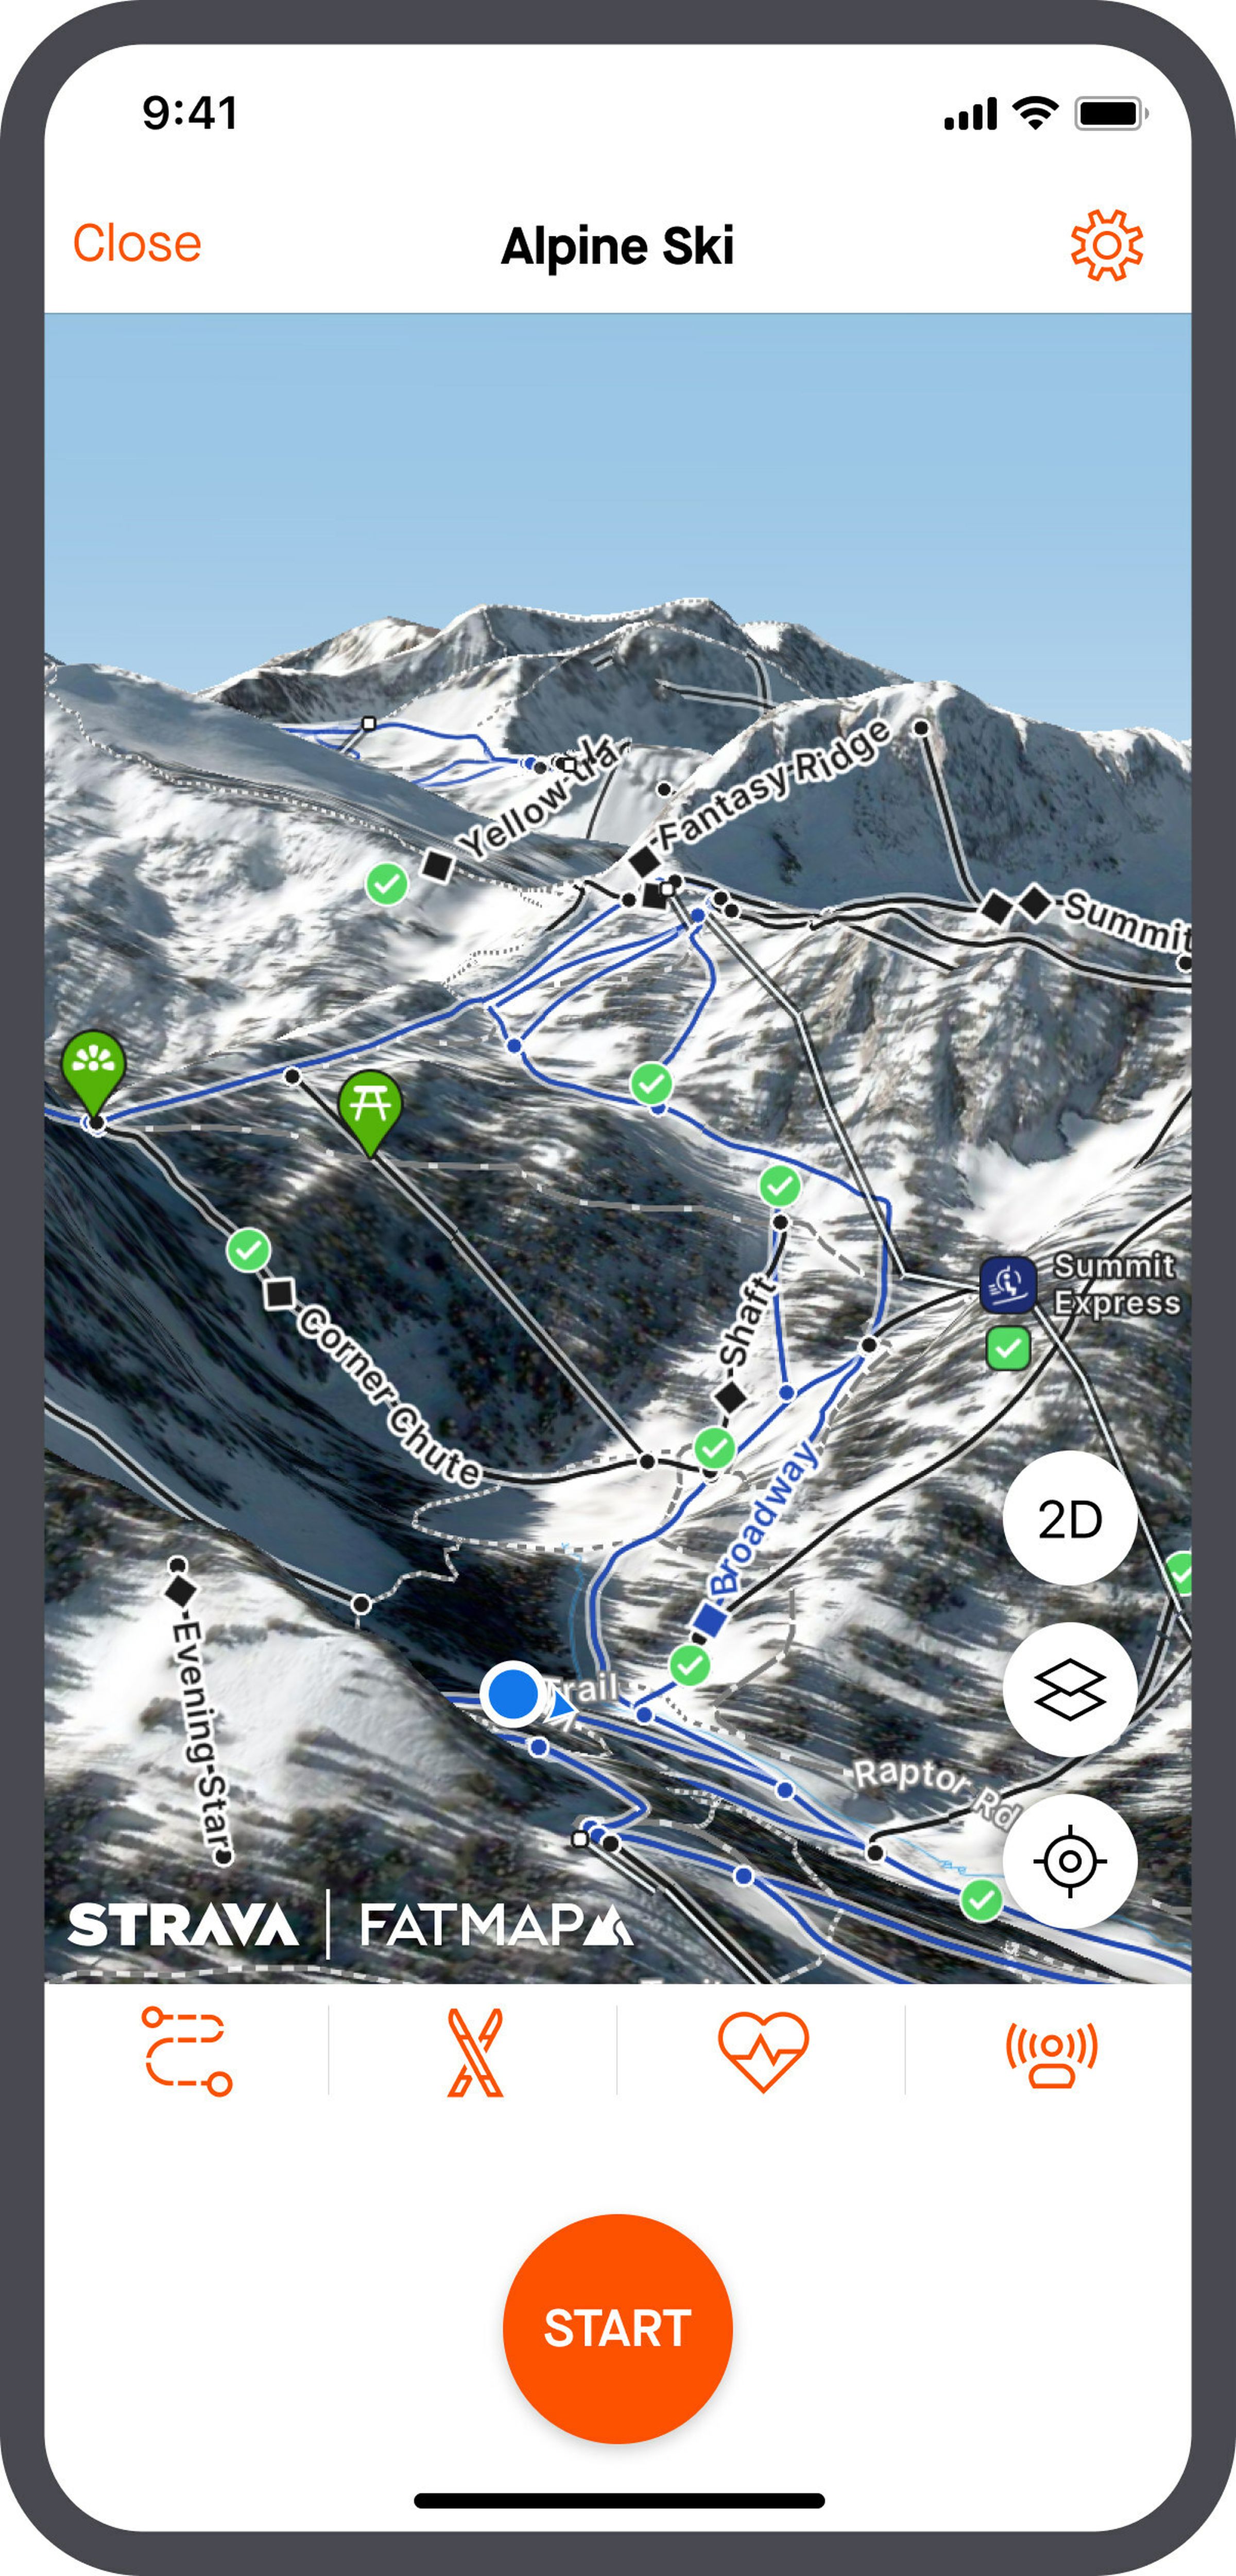 Strava buys Fatmap for its 3D outdoor maps